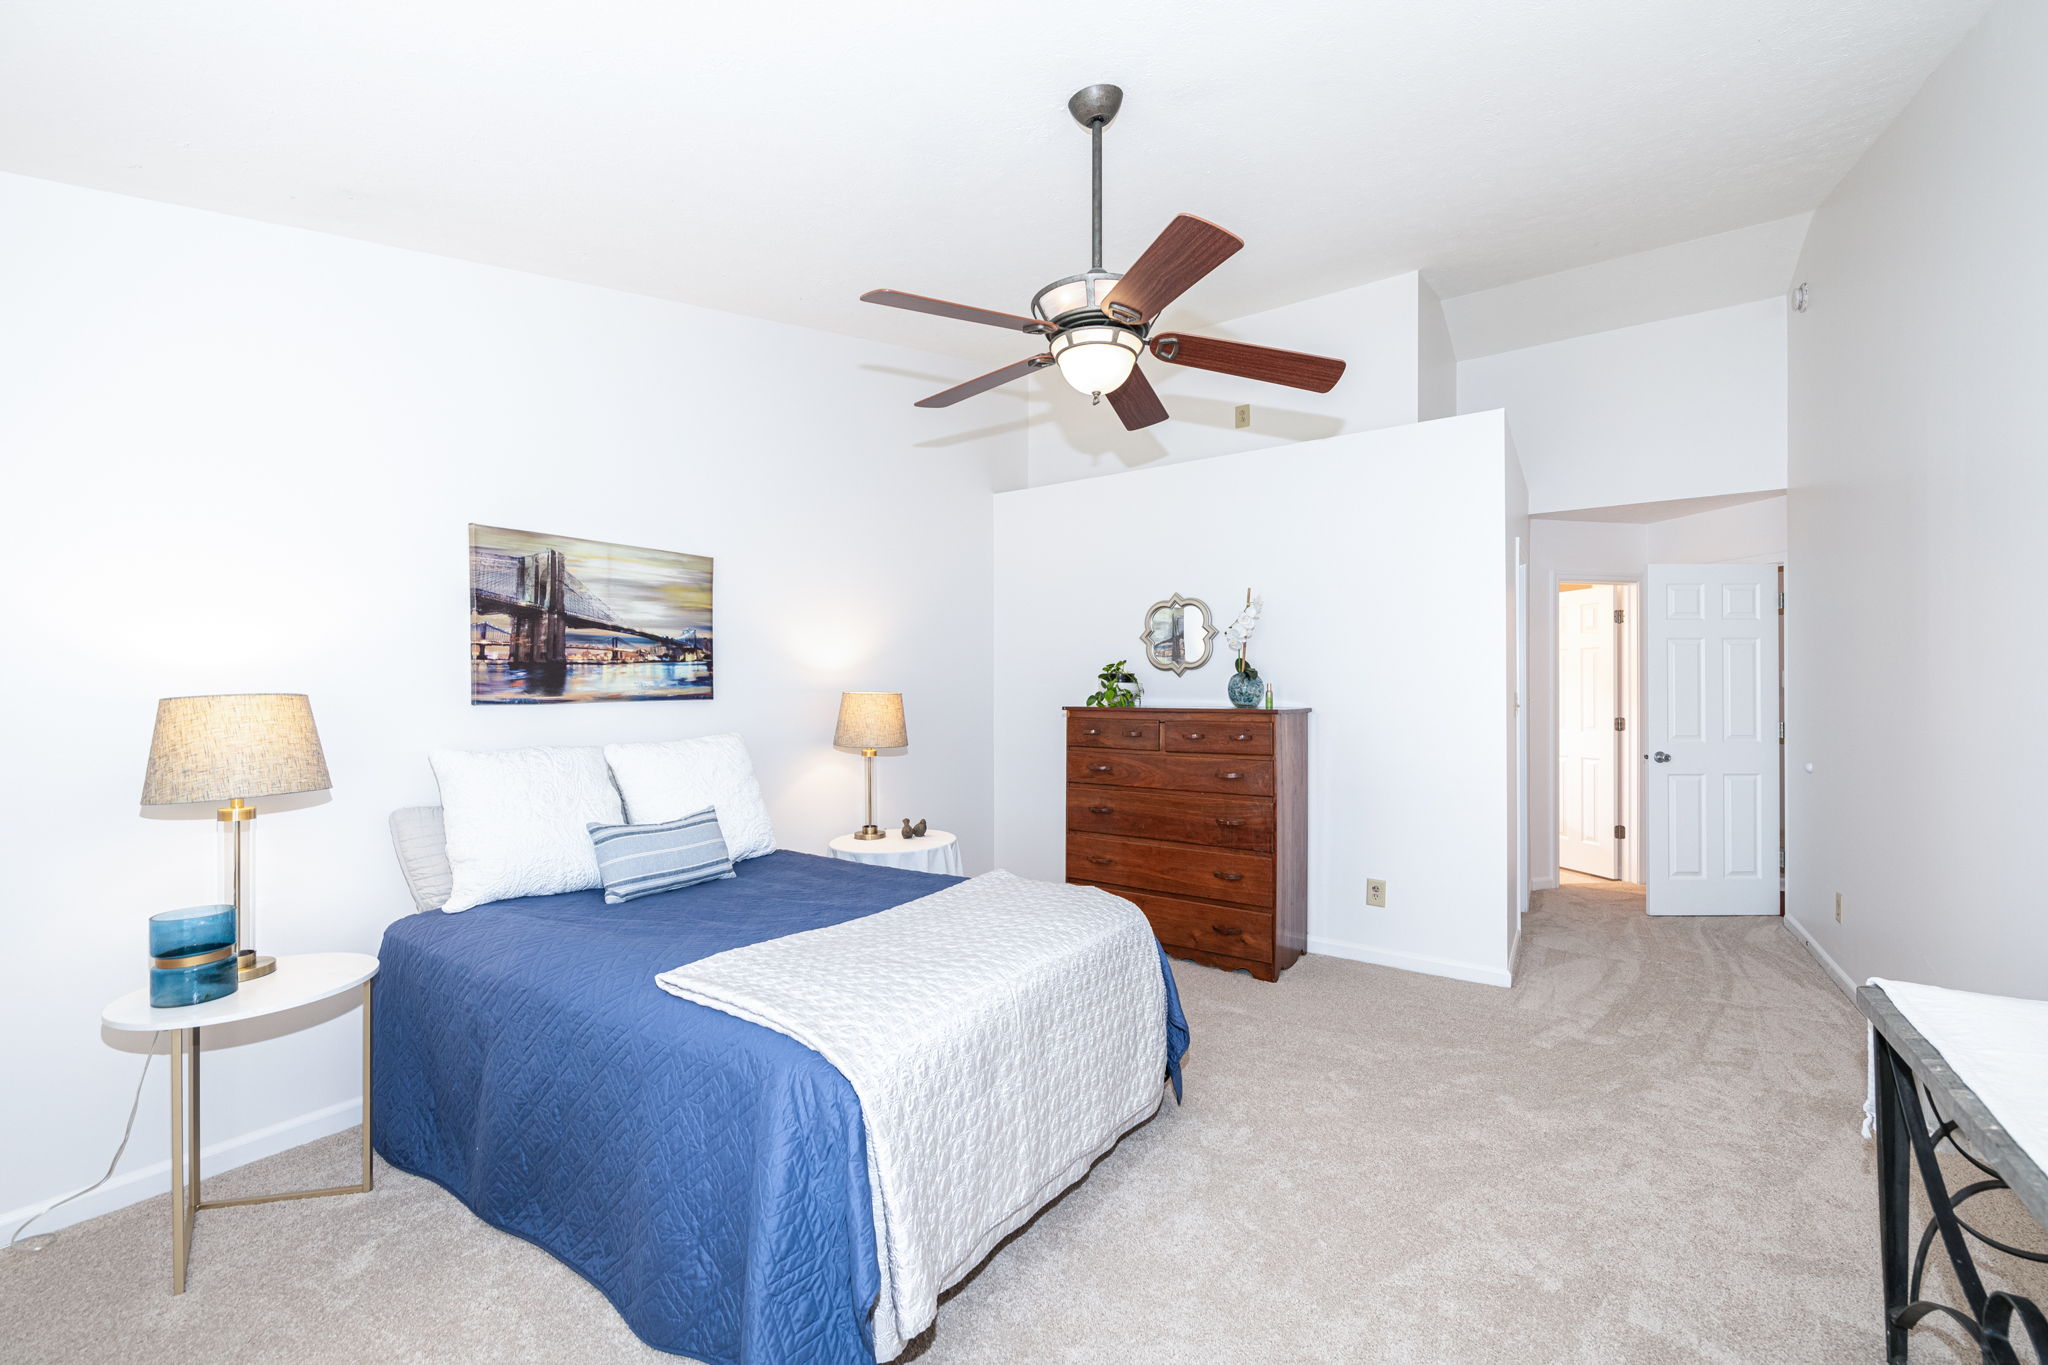 Vaulted ceiling enhances the spaciousness of this lovely primary bedroom with the perfect evening sunset views.